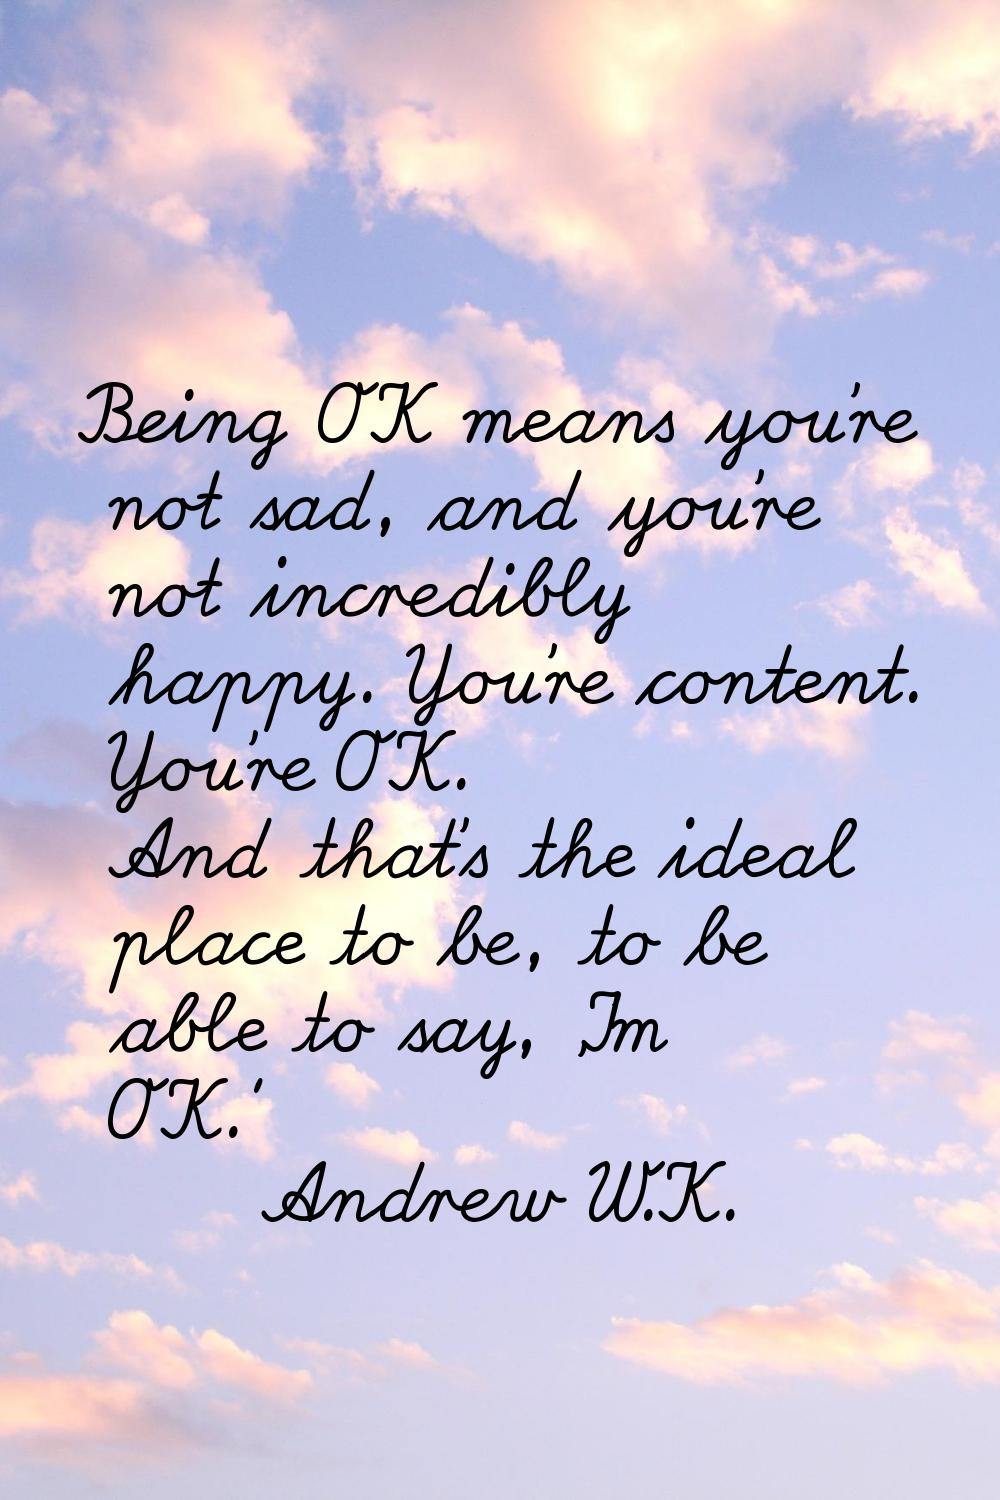 Being OK means you're not sad, and you're not incredibly happy. You're content. You're OK. And that